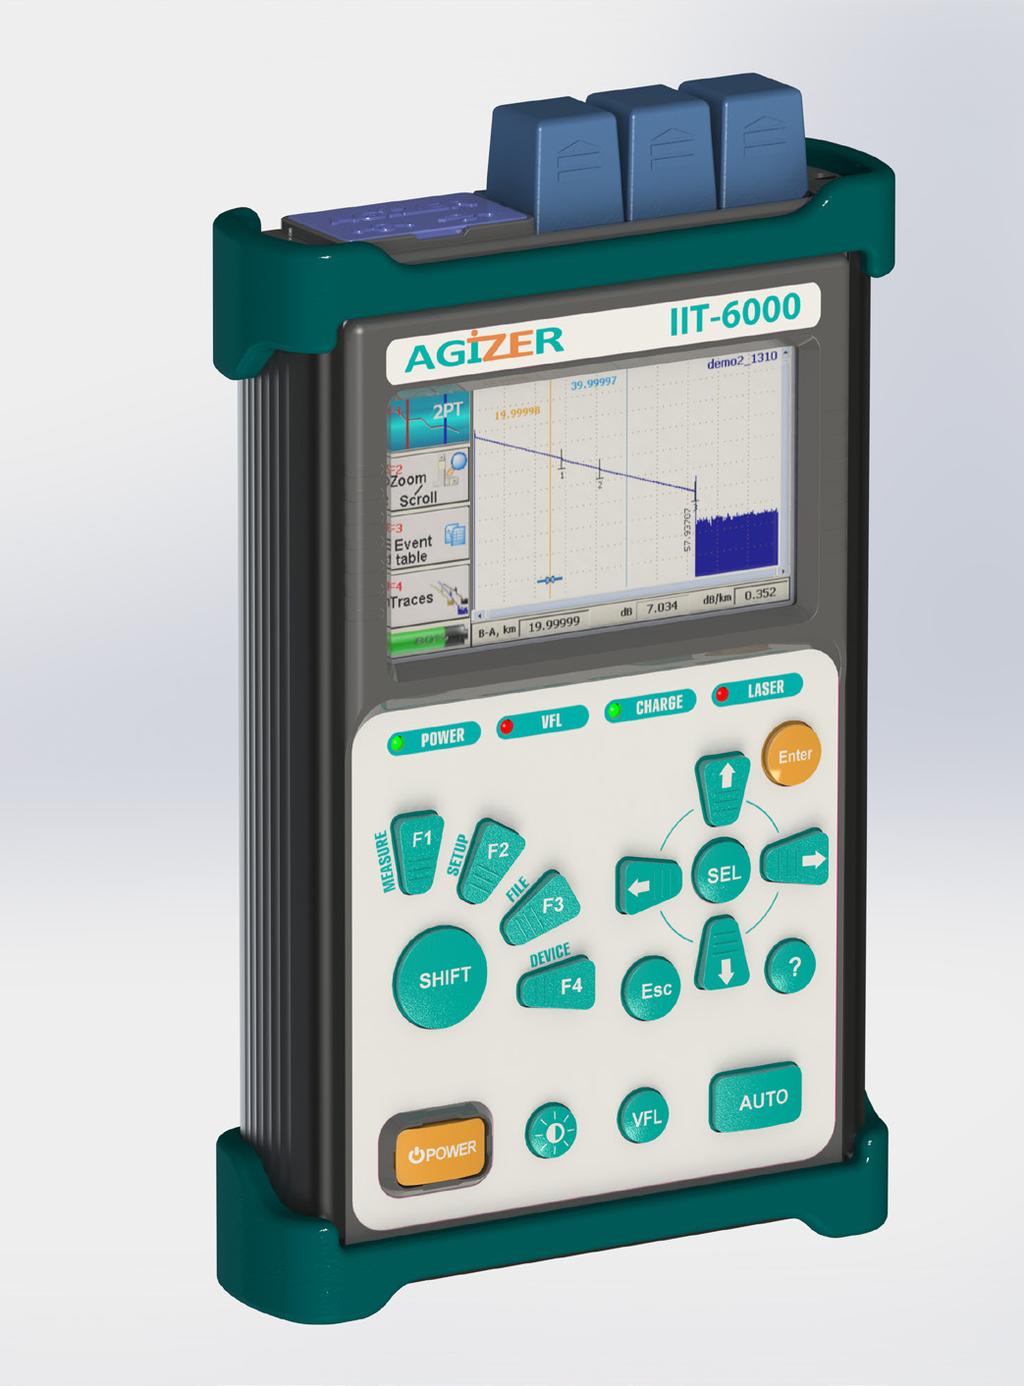 The Agizer OTDR IIT - 6000 Series If You Need More Power for Your Fiber Testing Professional Device Firmware It knows what you need After many years of collecting user feedback about hand-held